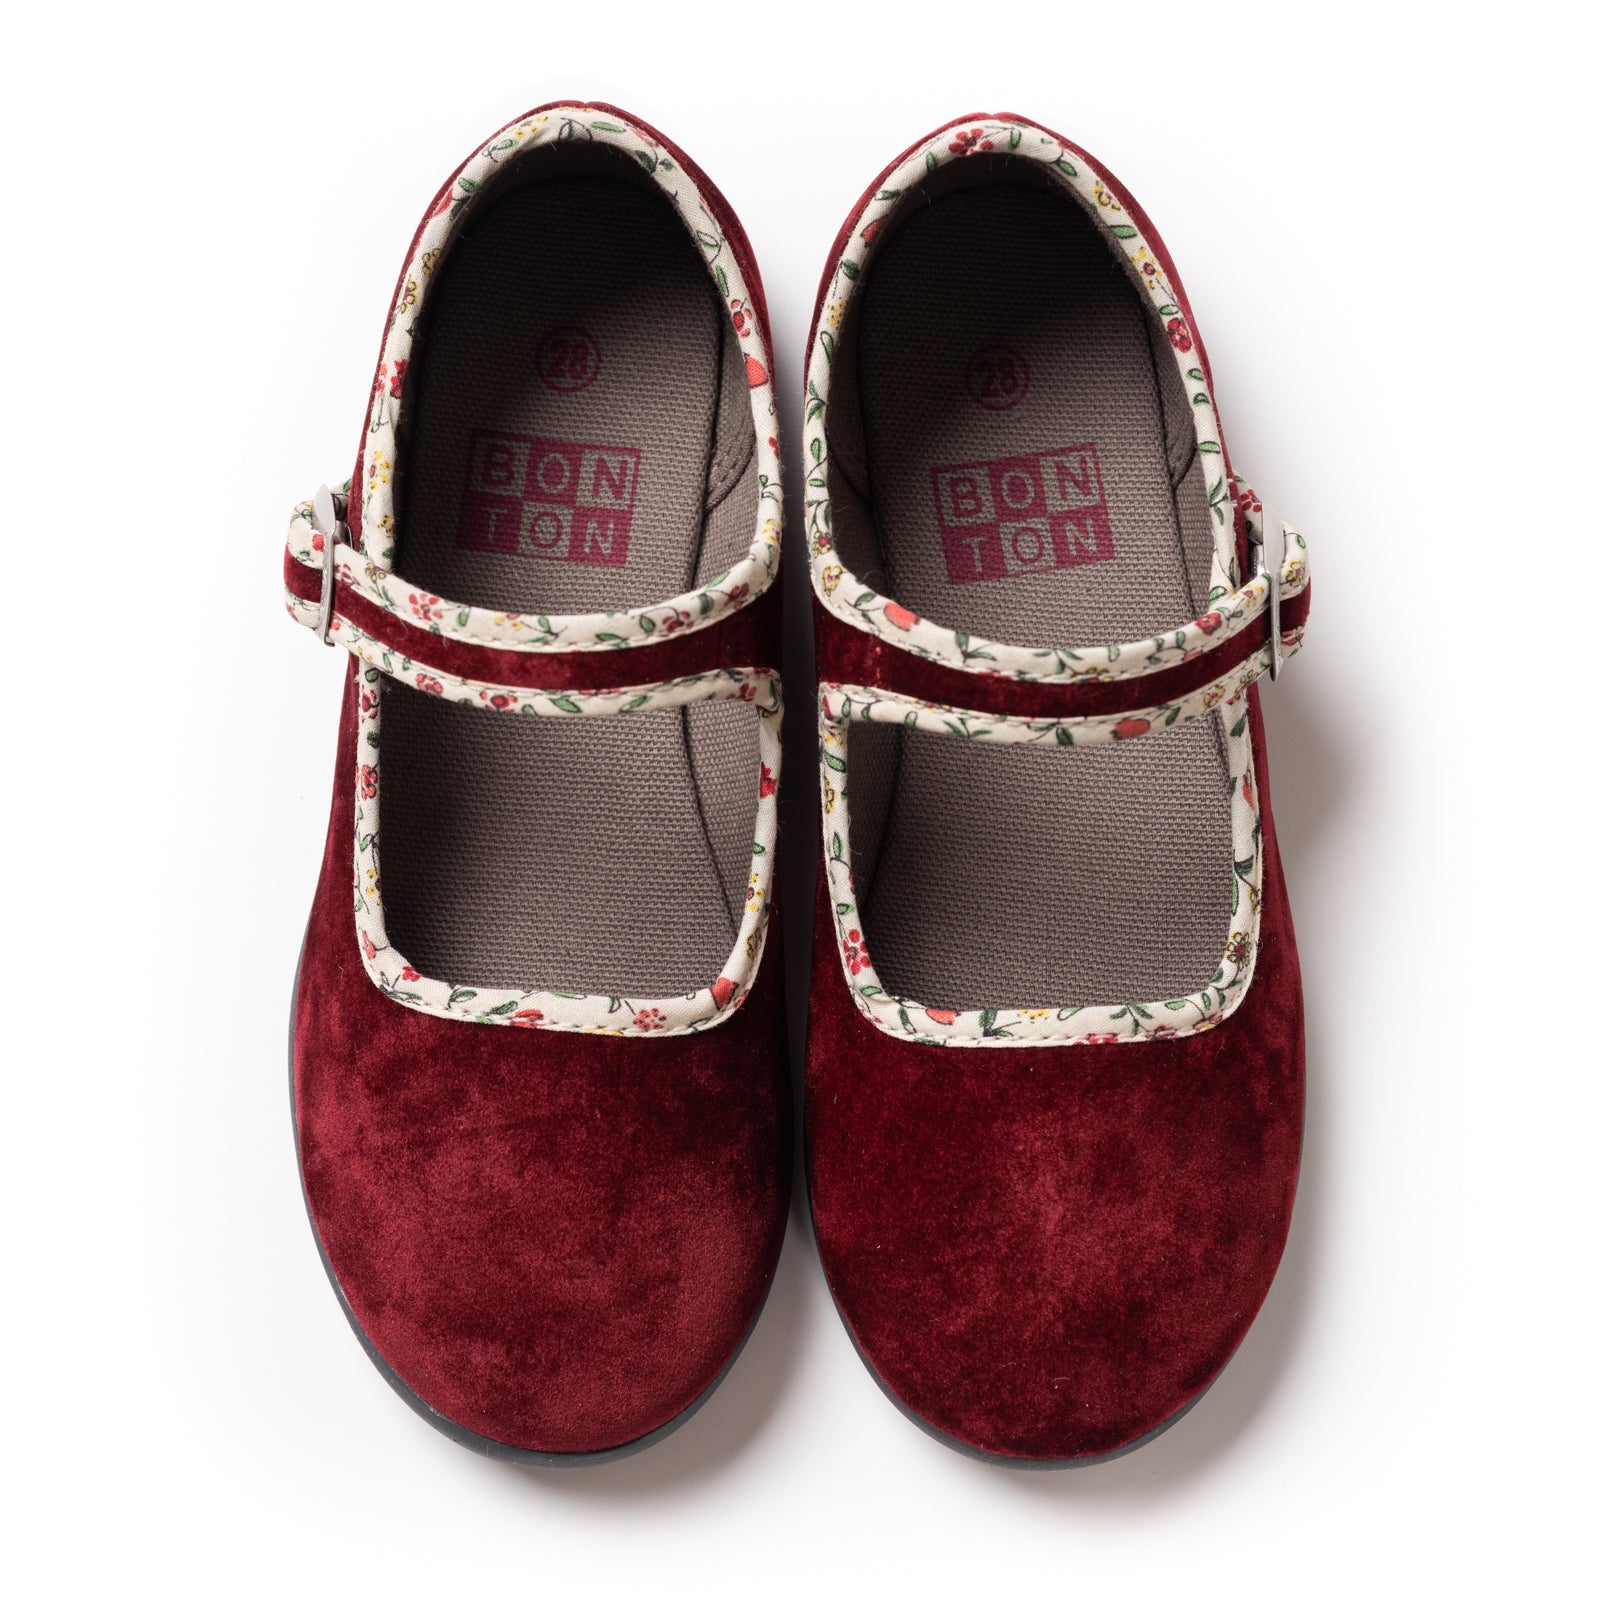 Baby Girls Bordeaux Red Cotton Shoes